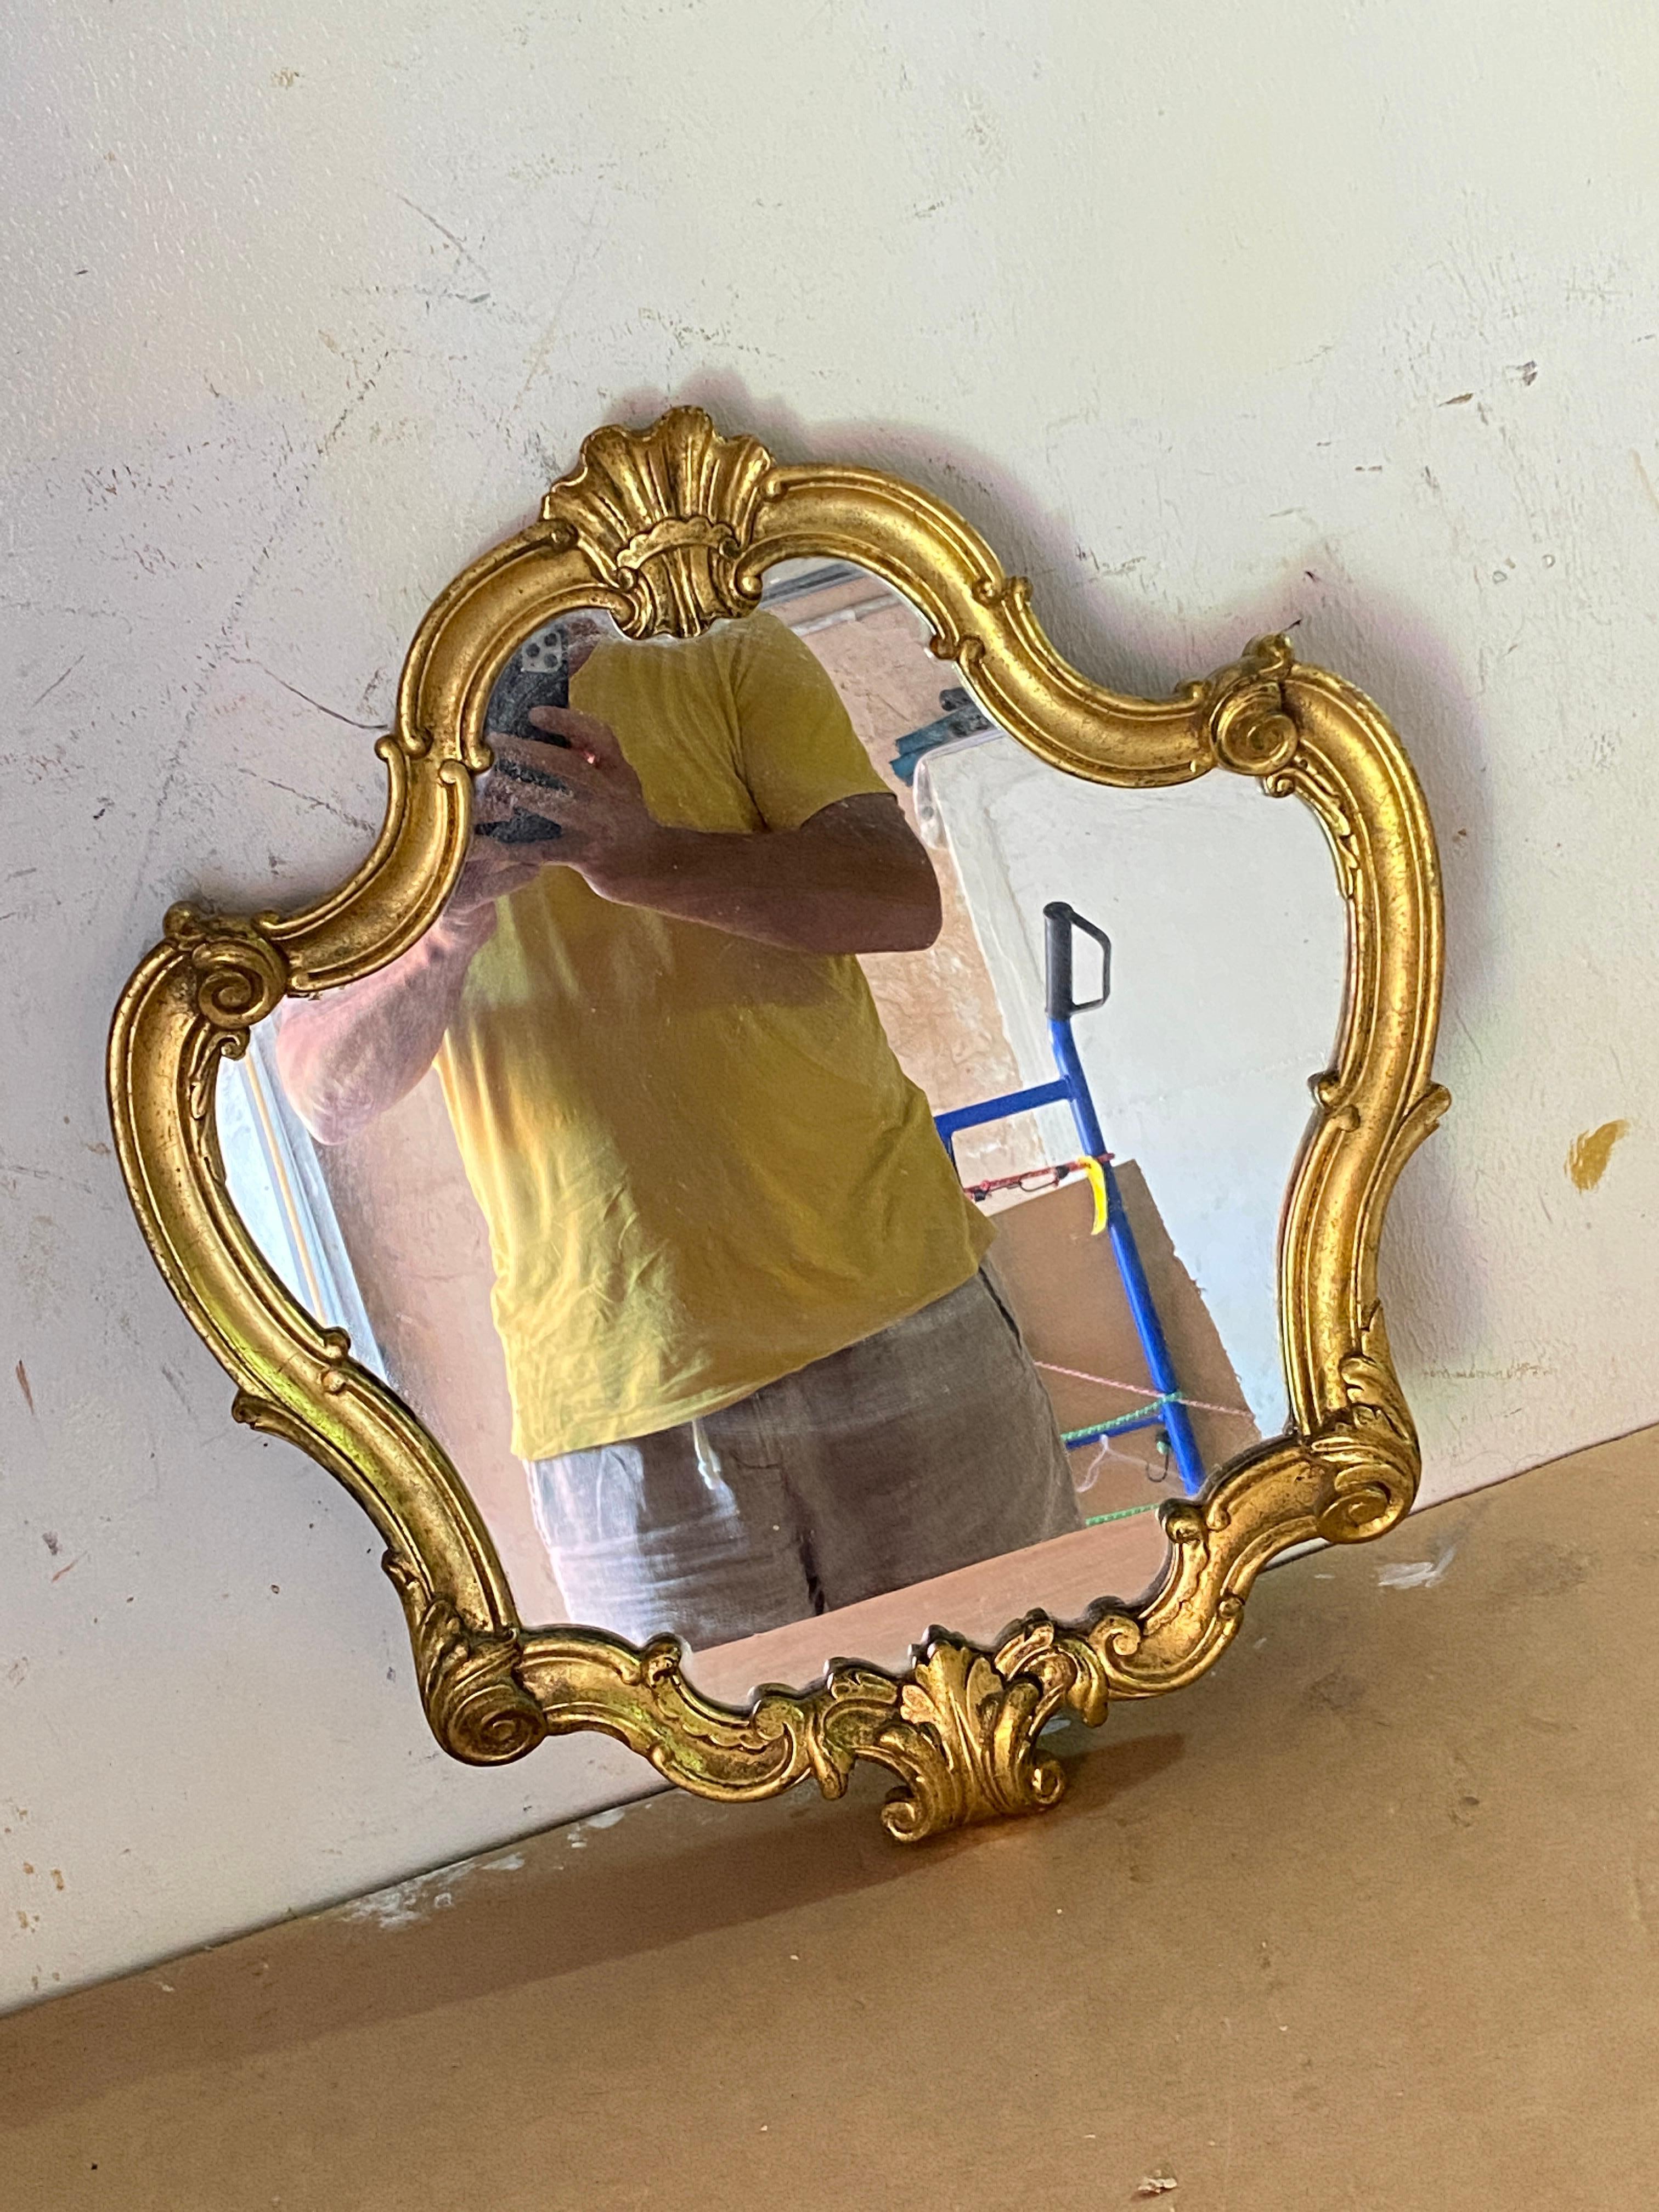 Carved, turned, and gilded wooden mirror with gold leaf. There is a label on the back which guarantees the authenticity of the gold leaf gilding. This wooden mirror was made at the beginning of the 20th century in France. Its color is that of gold.